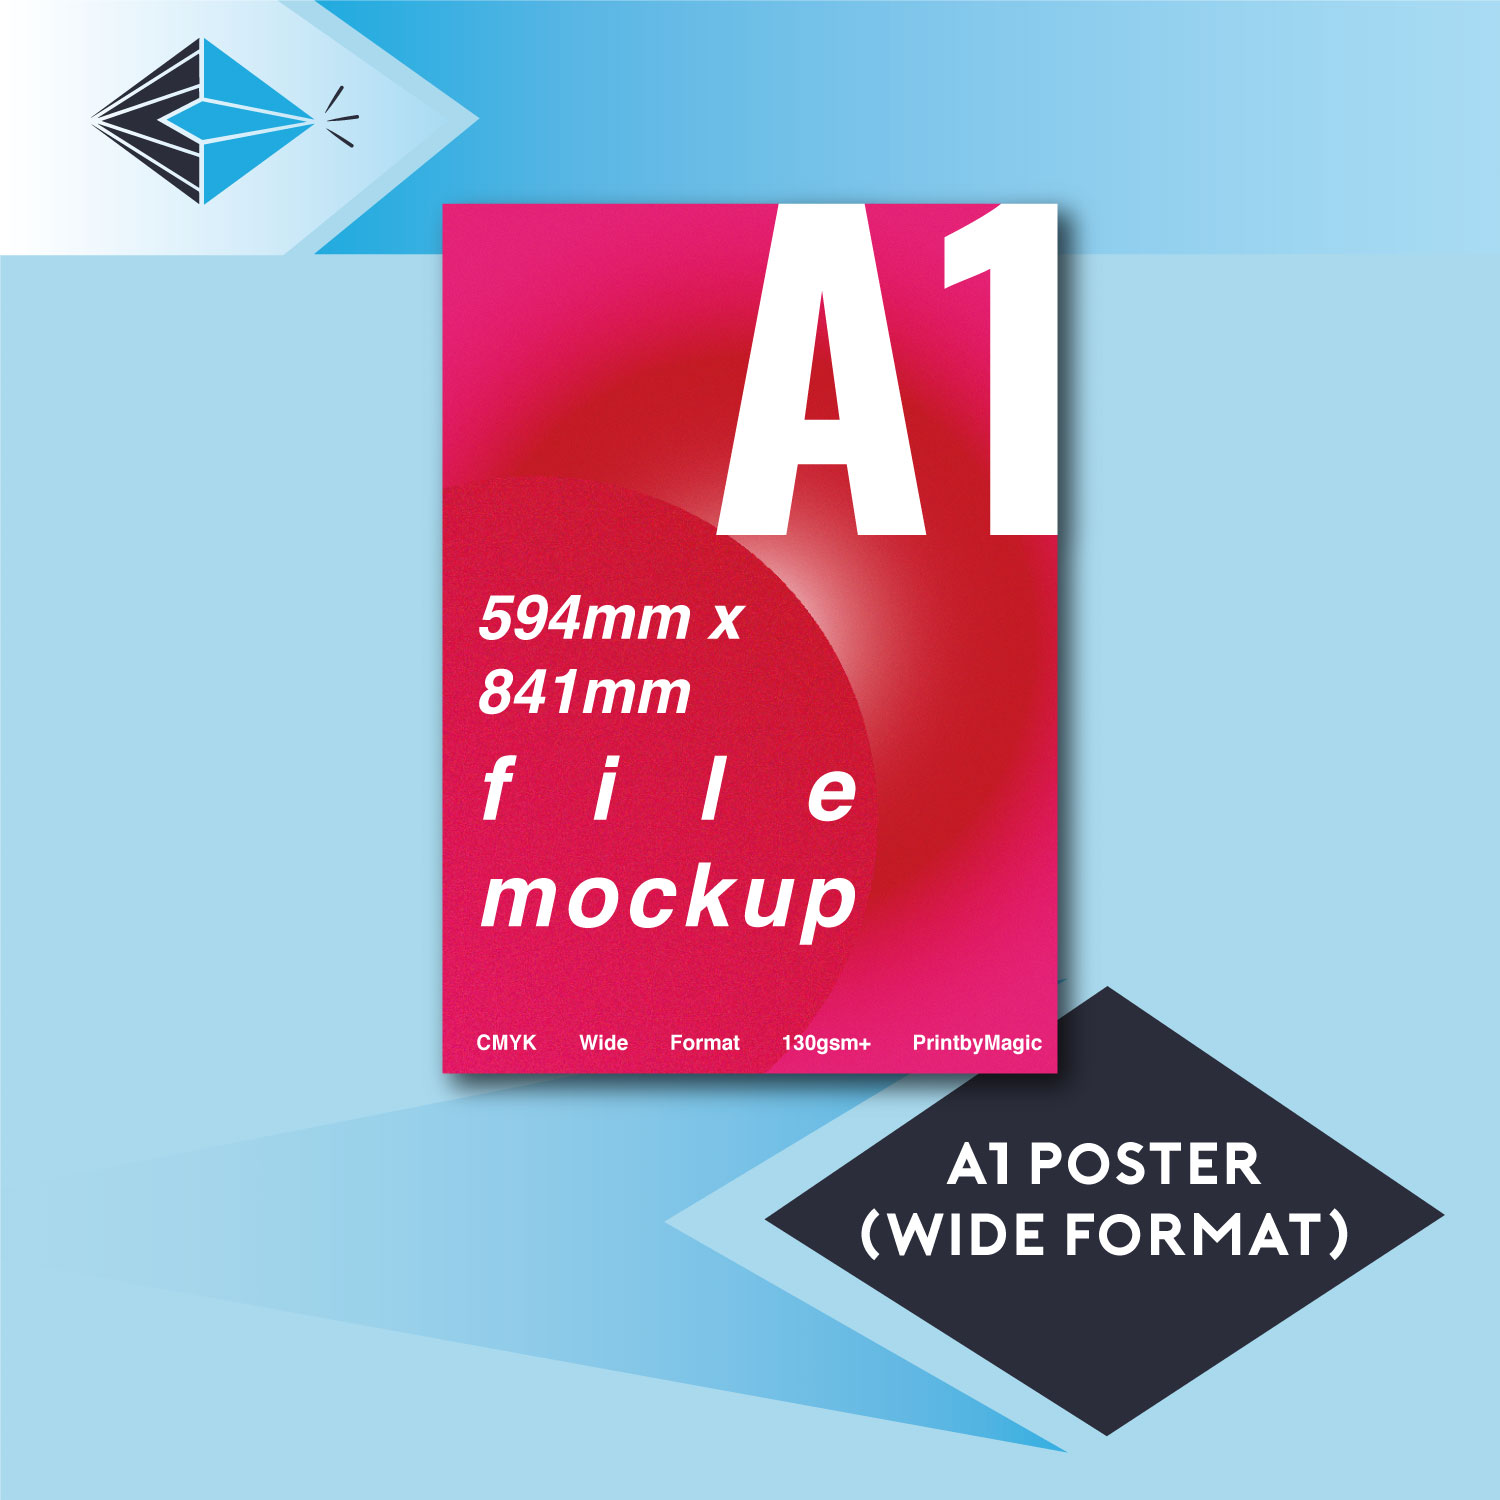 Standard A1 Poster Printing - Wide Format